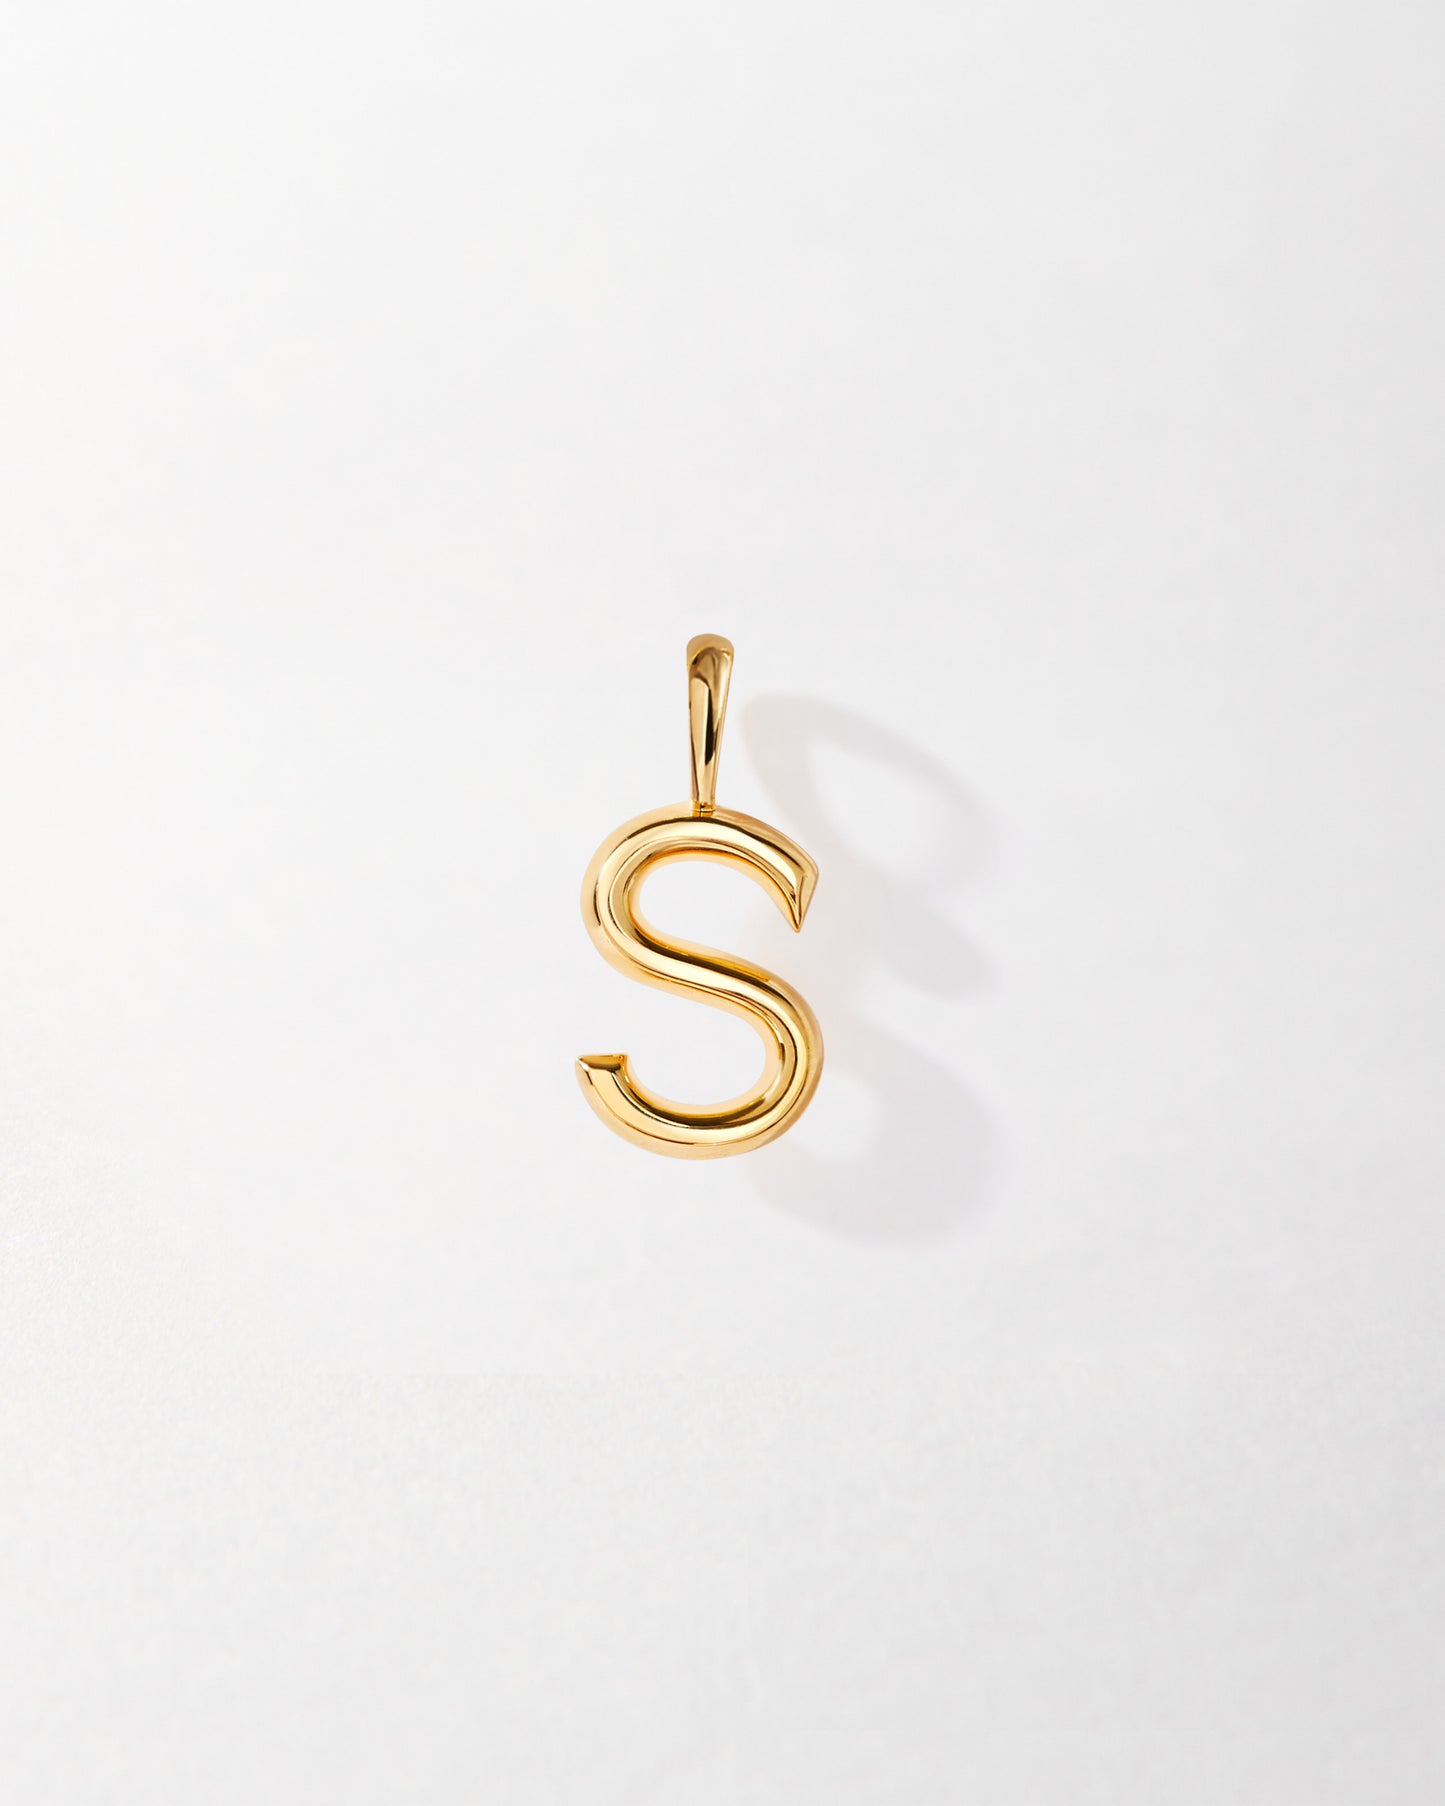 Selected Initial (Gold)